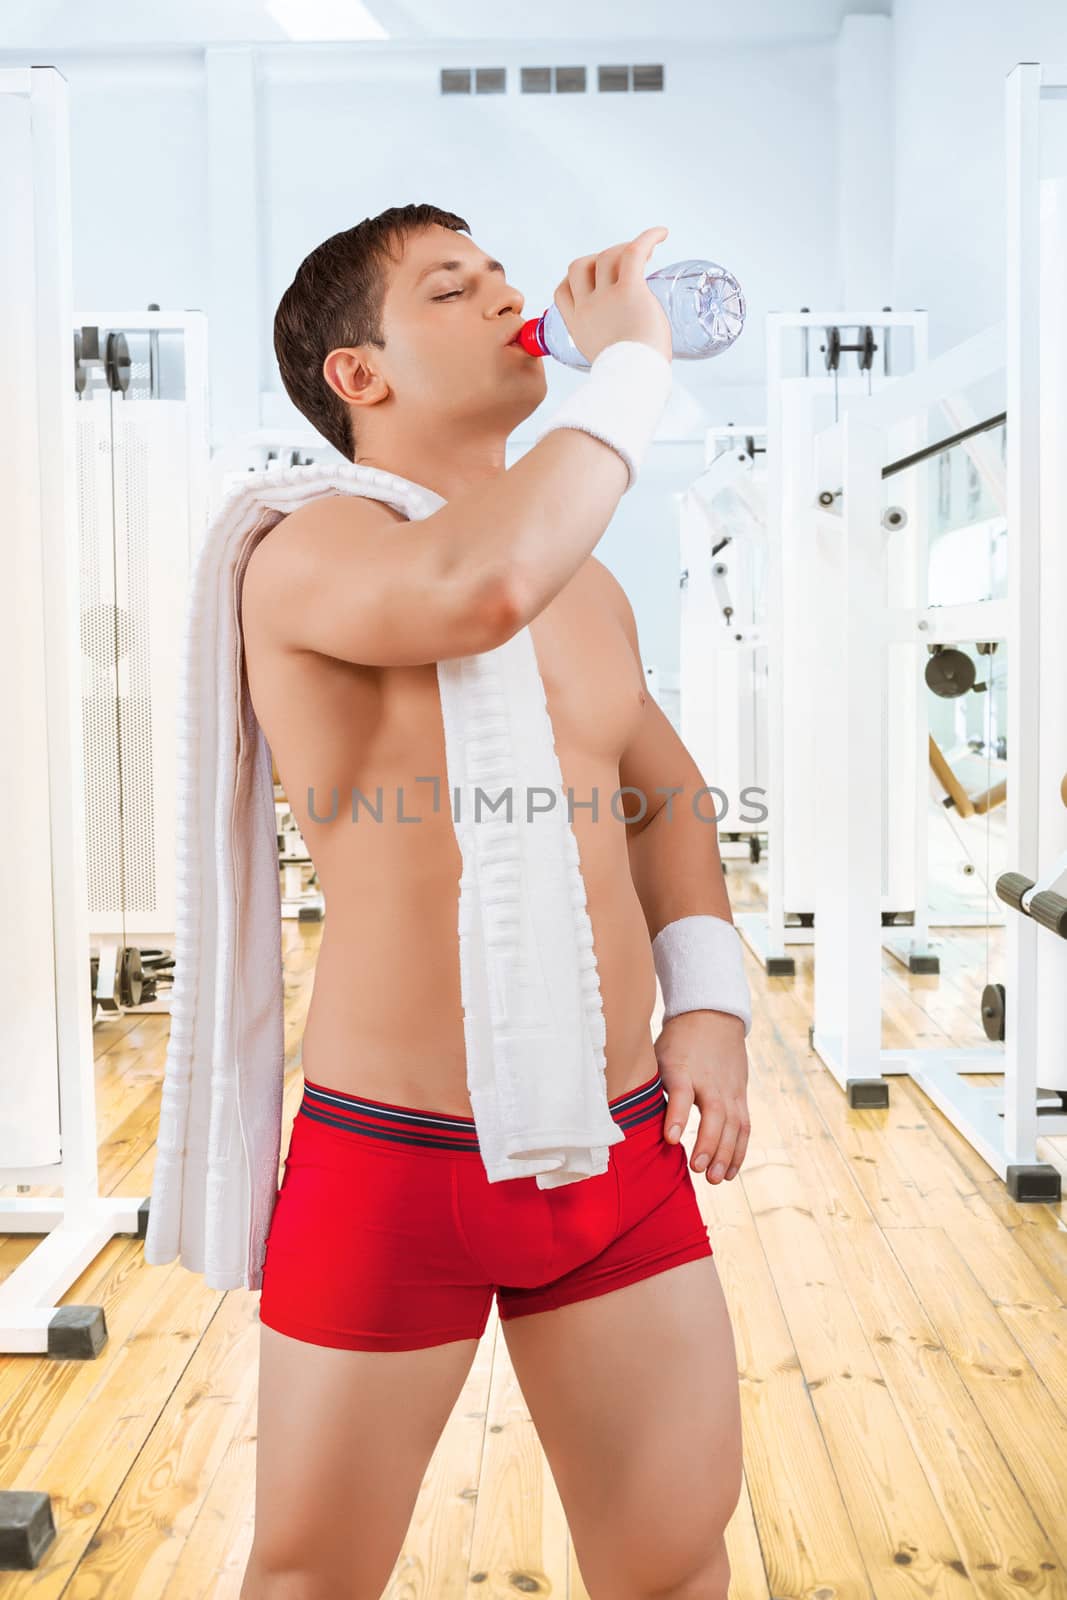 a sportsman drinking water in the gym by mihalec